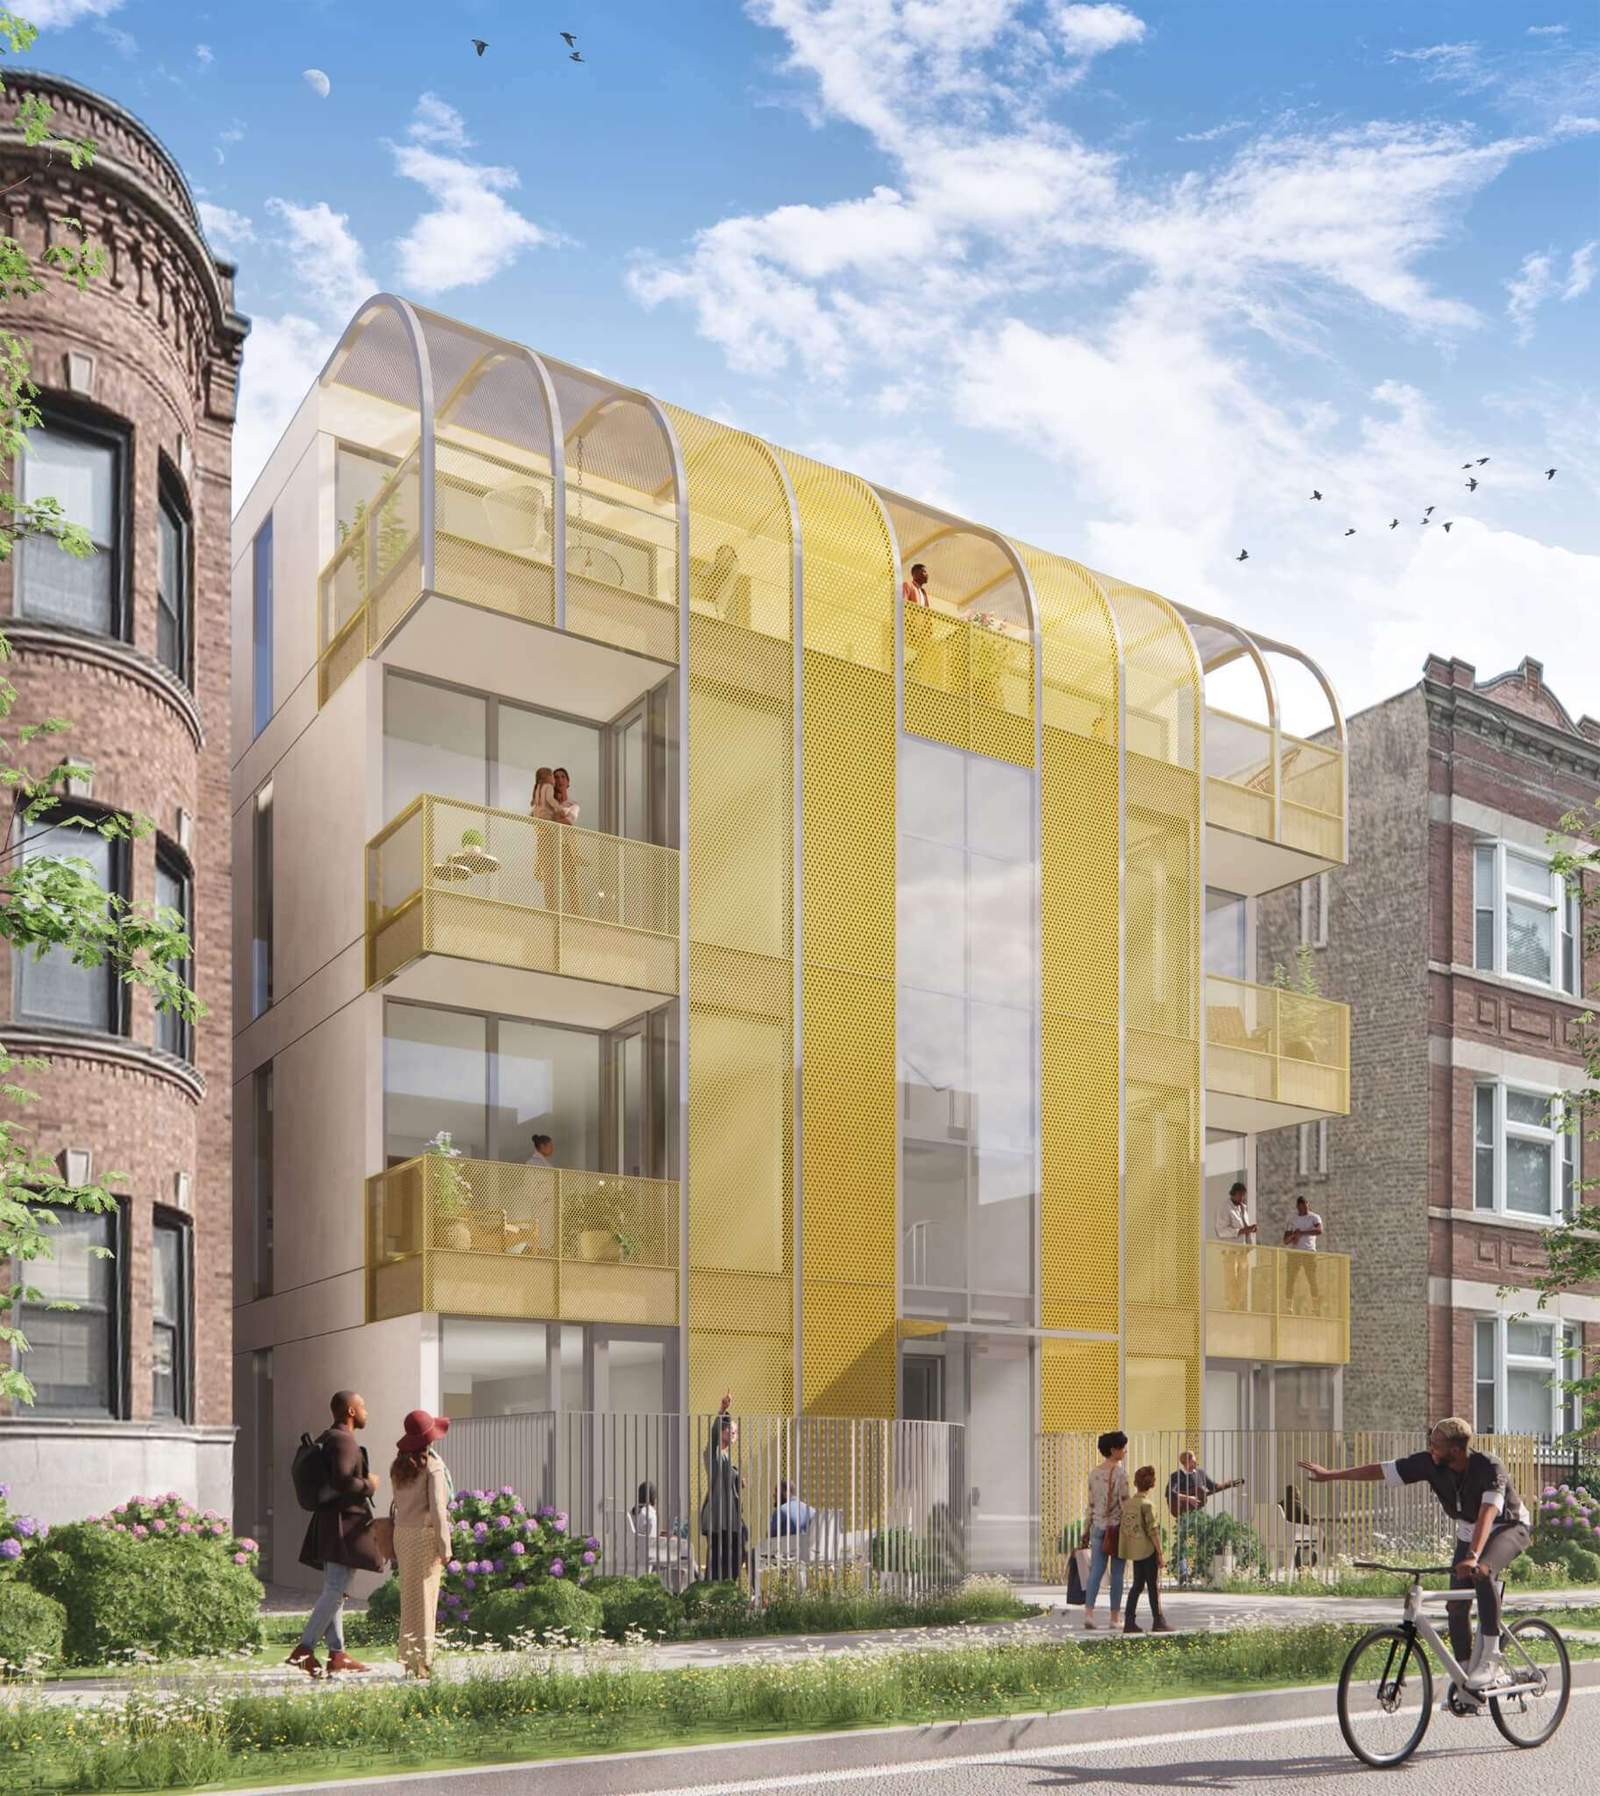 Forty-two finalists announced for Come Home, a housing ideas competition in Chicago